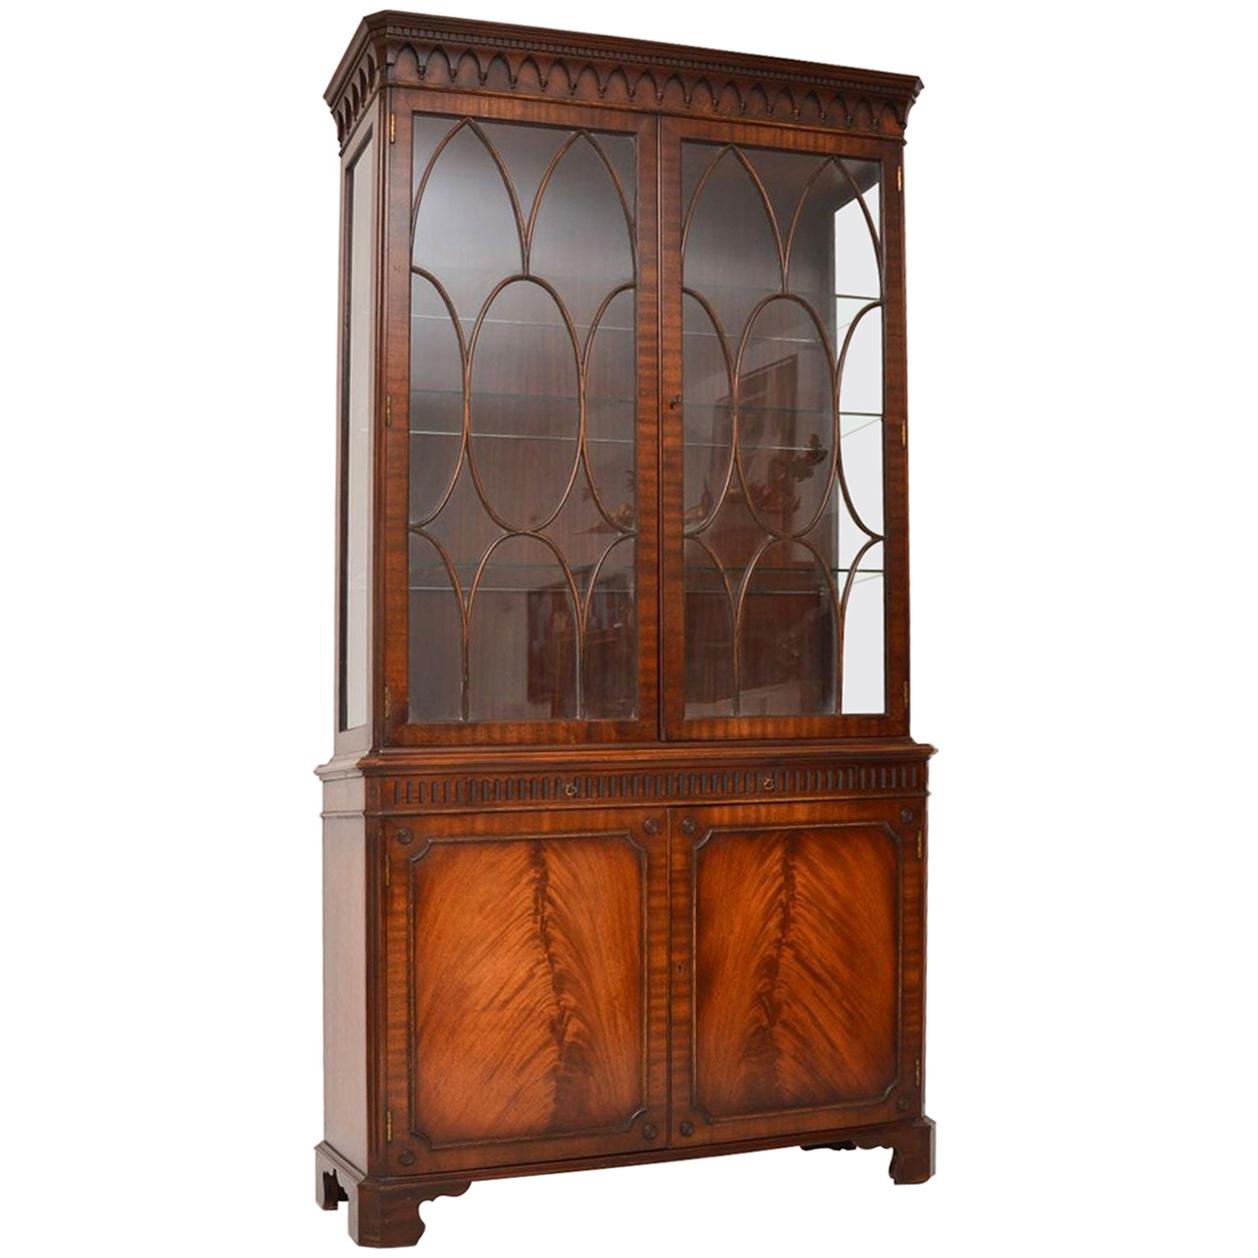 Antique Georgian Style Flame Mahogany Display Cabinet